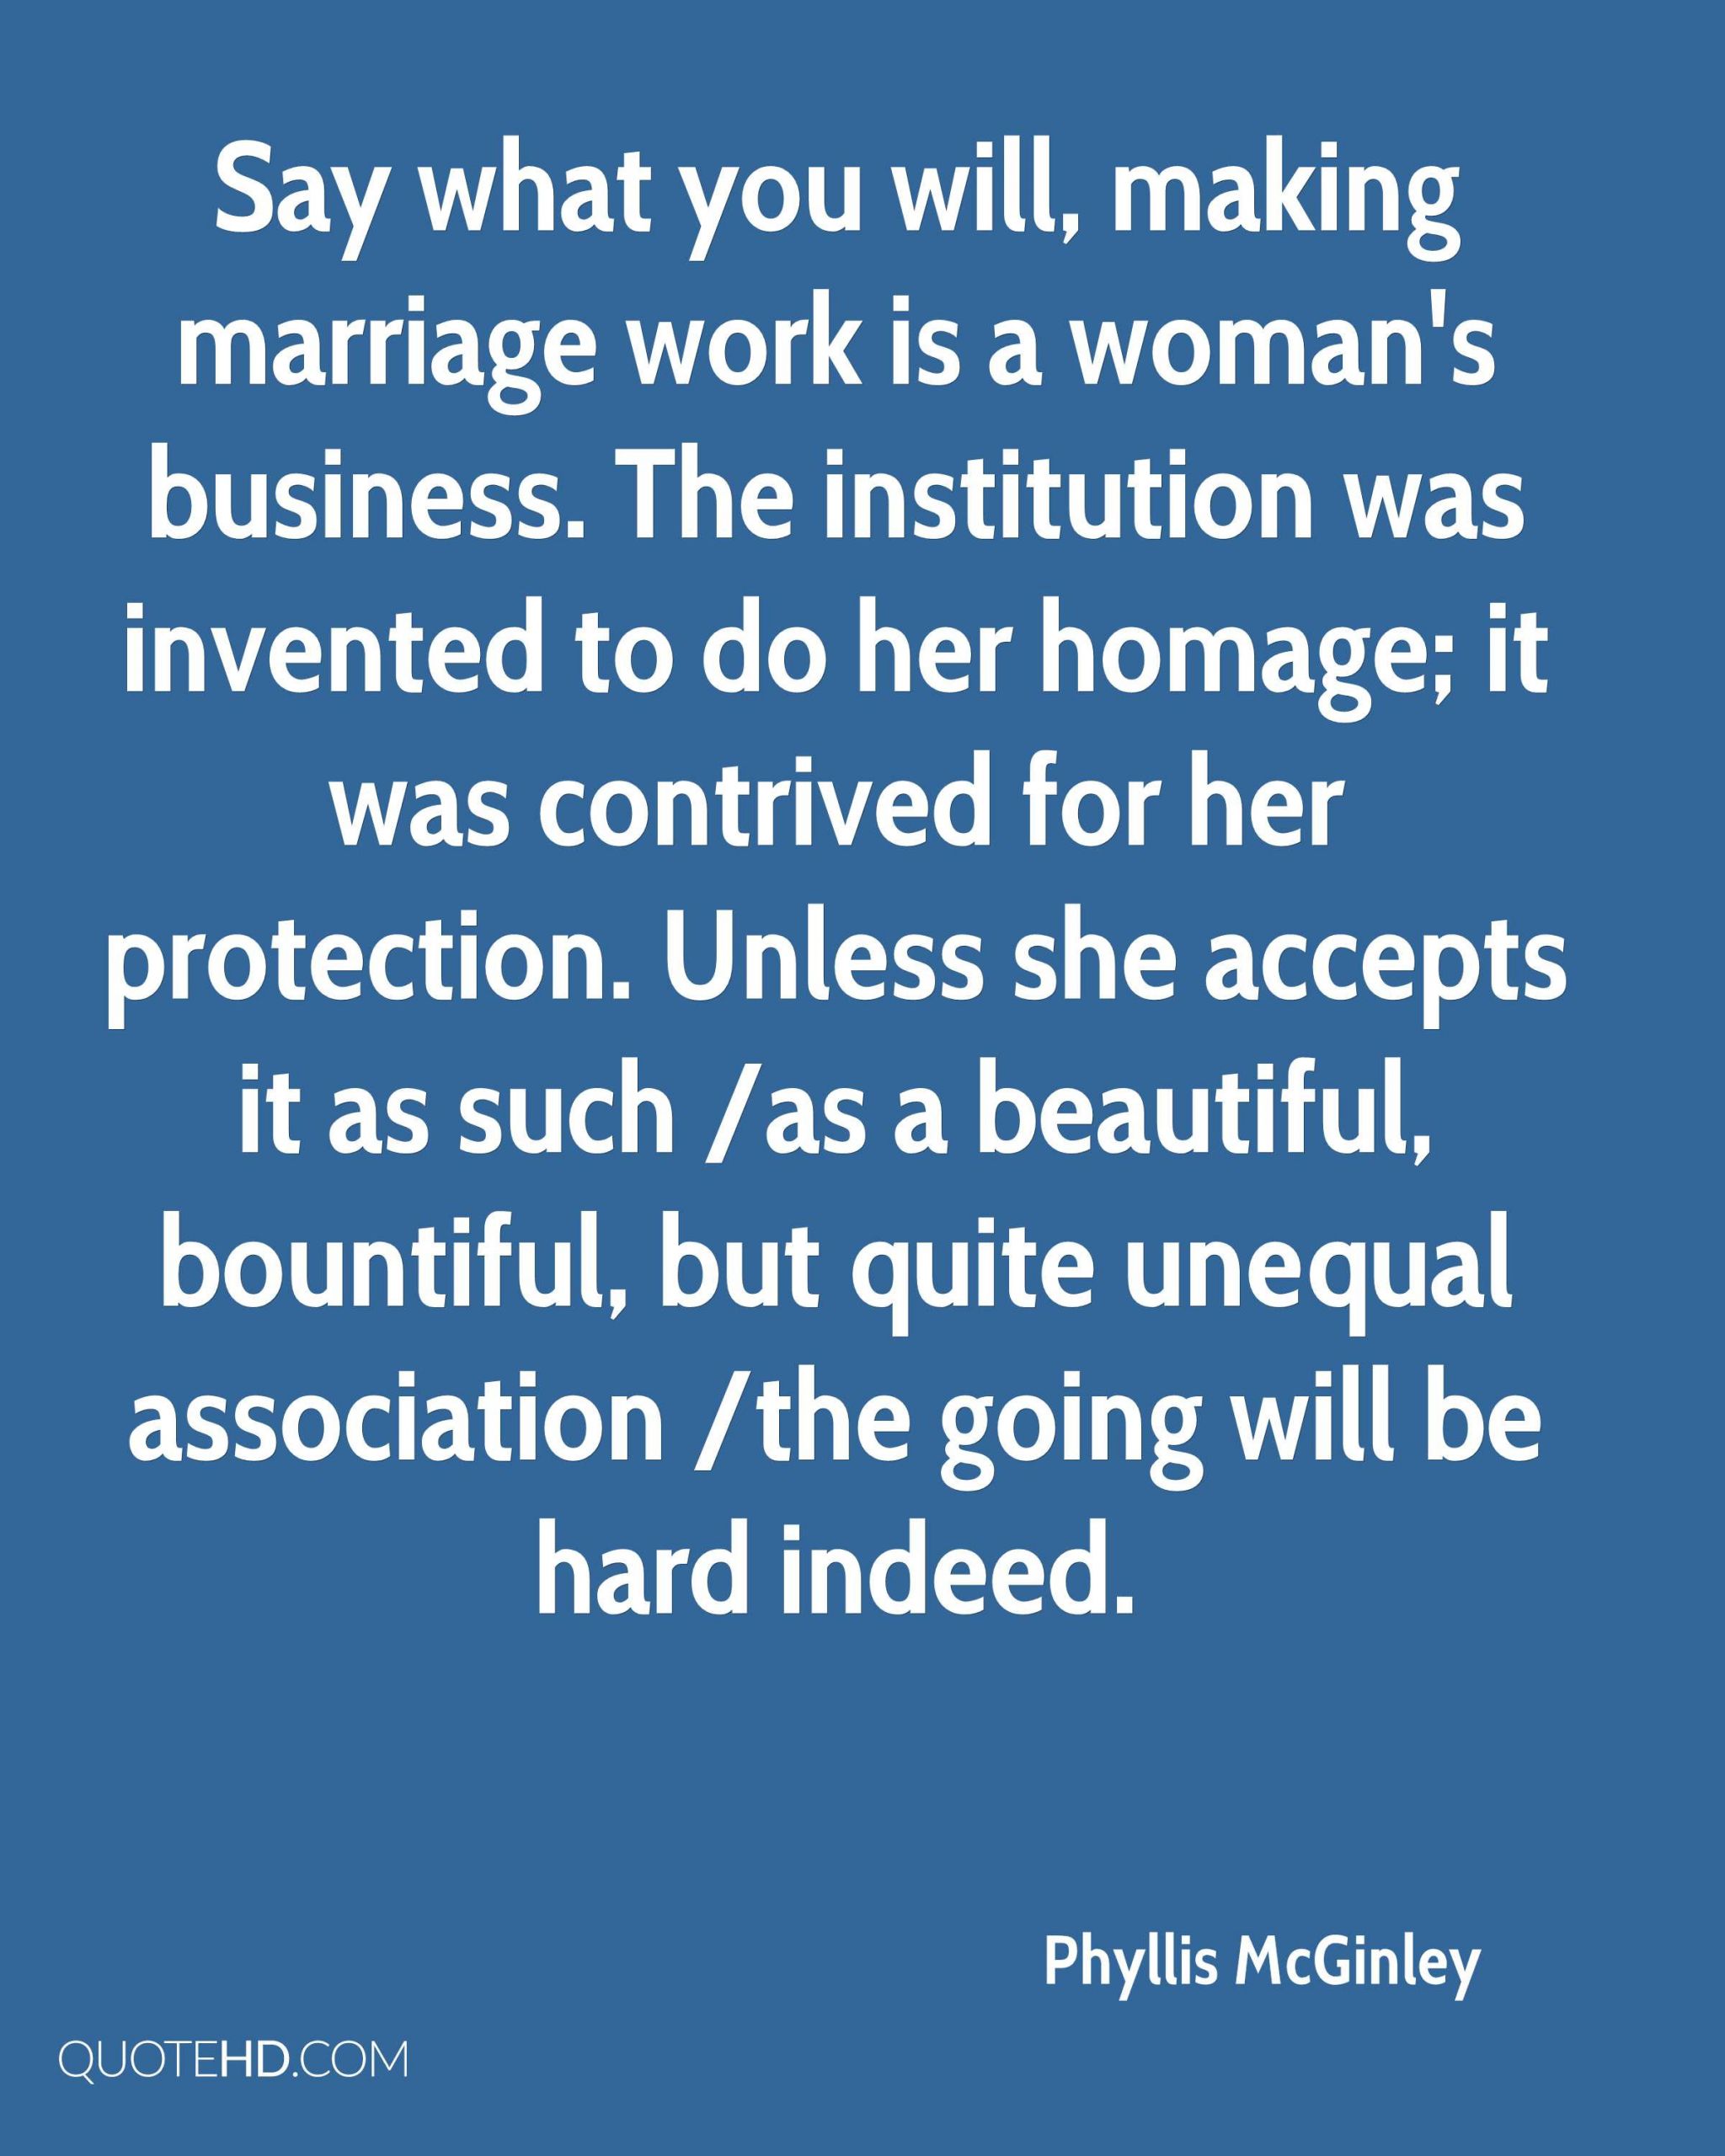 Quotes About Making Marriage Work
 Phyllis McGinley Marriage Quotes